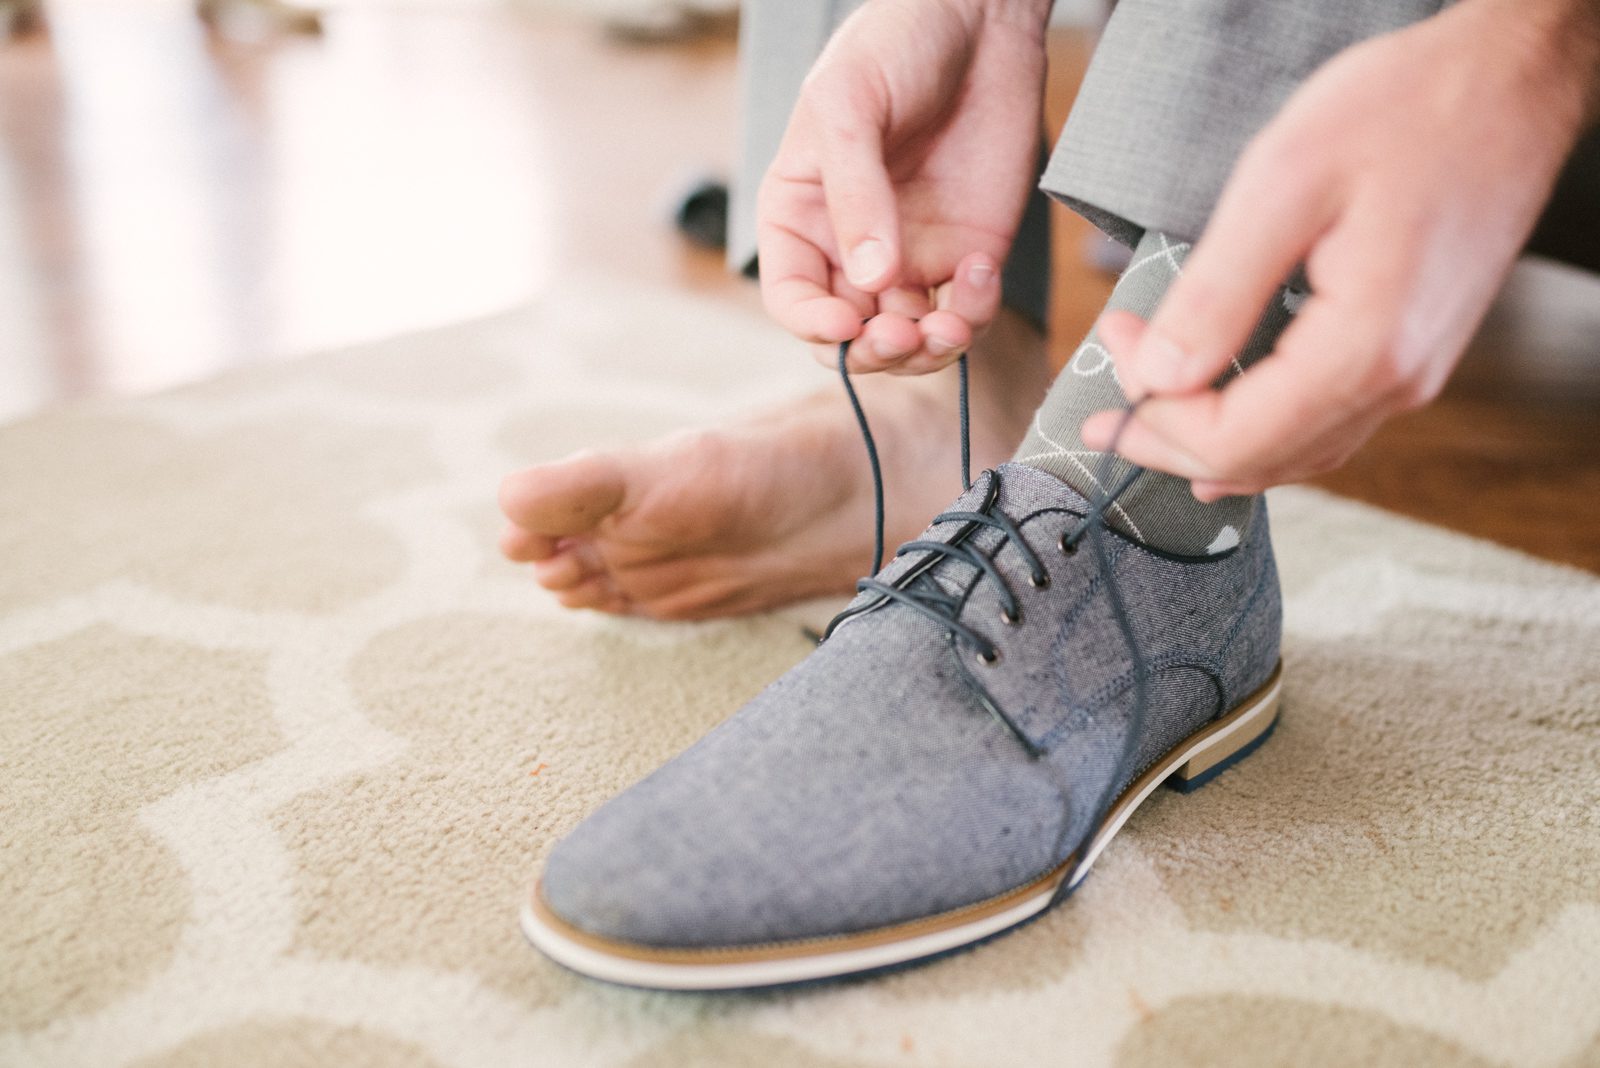 Groom tying shoes at Limoneira Ranch Wedding by San Luis Obispo Wedding Photographer Yvonne Goll Photography